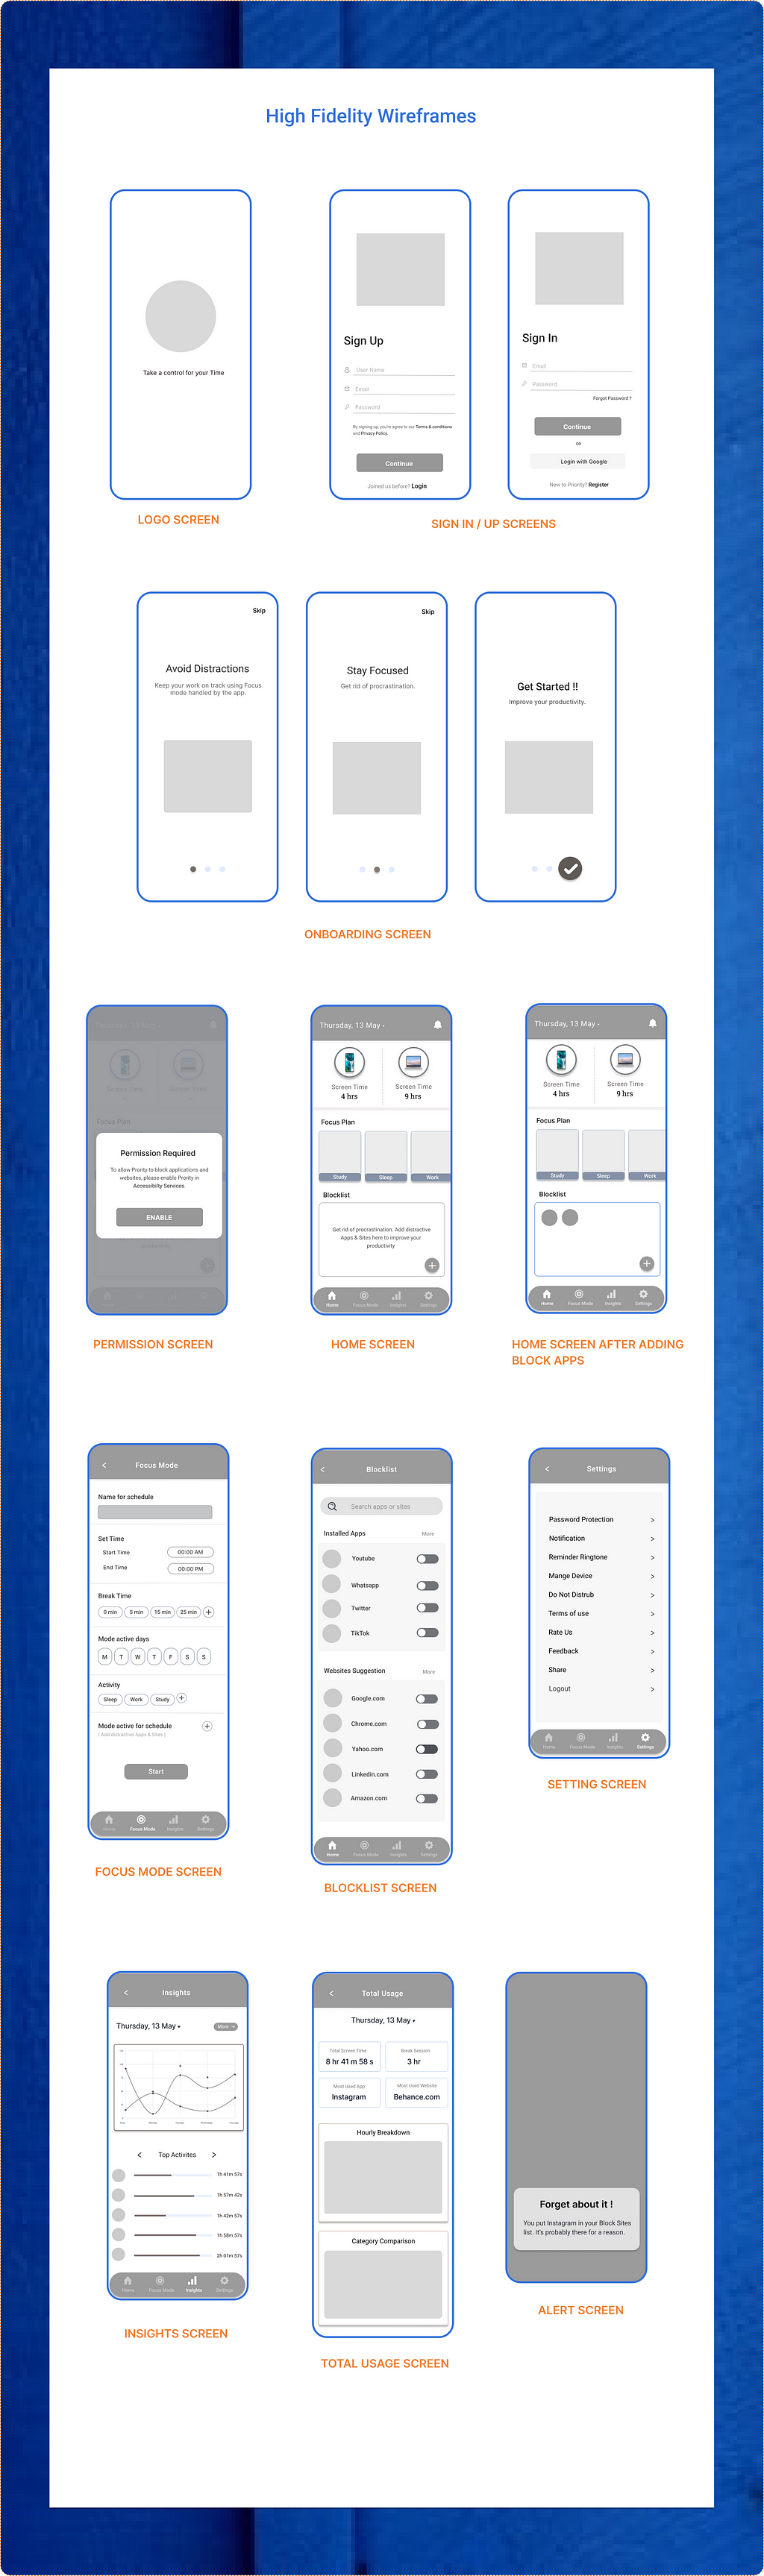 This image is of the Hi-fi wireframes of the Priority app.